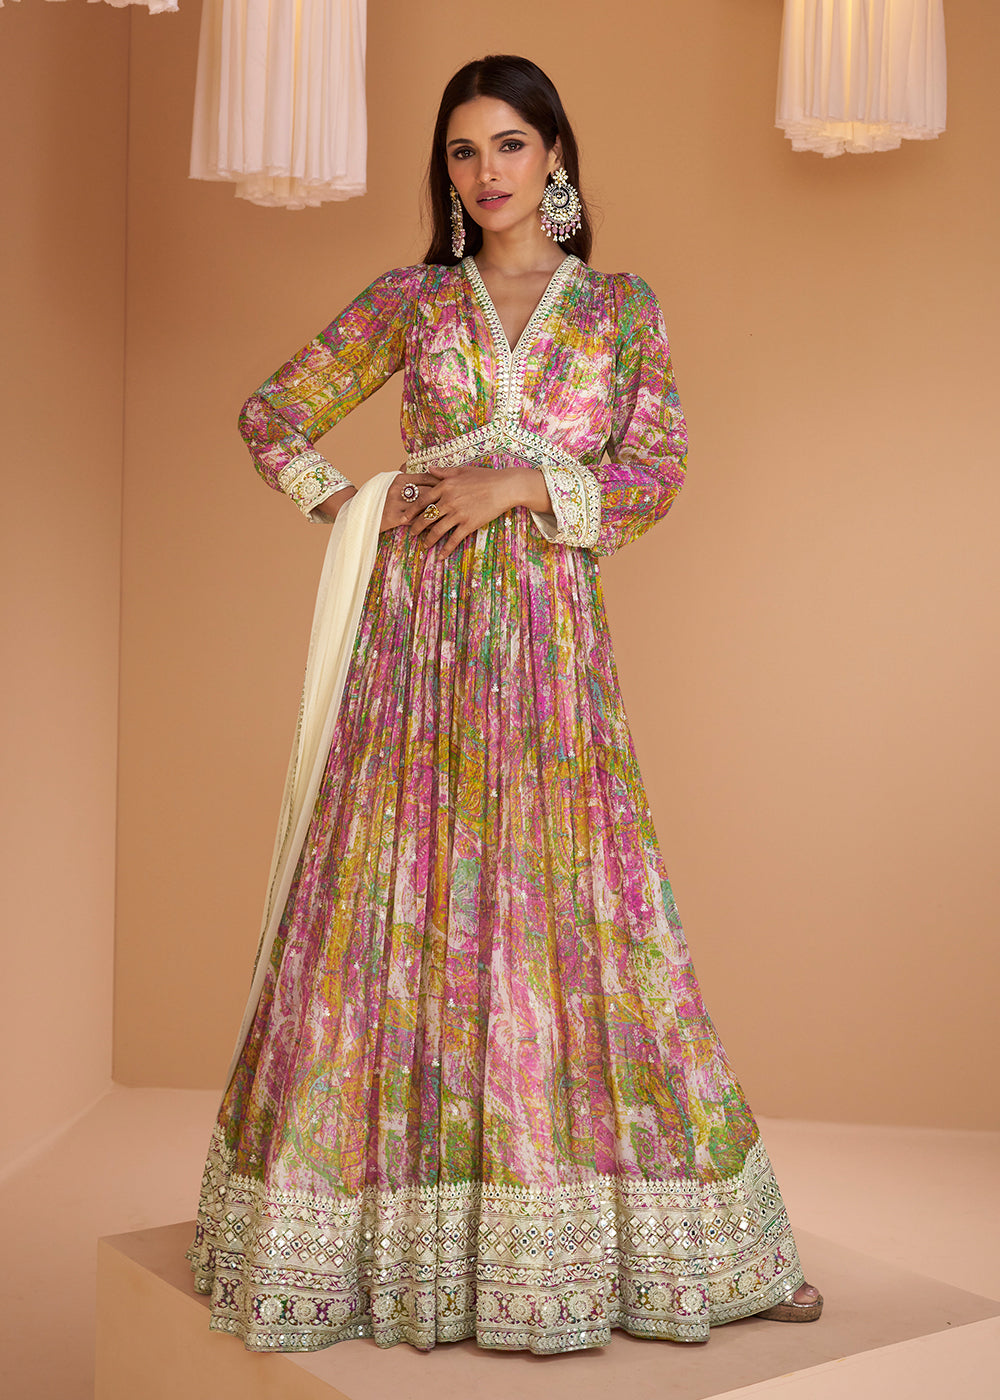 Buy Now Multicolor Pink Floral Printed Wedding Festive Anarkali Gown Online in USA, UK, Australia, Canada & Worldwide at Empress Clothing.